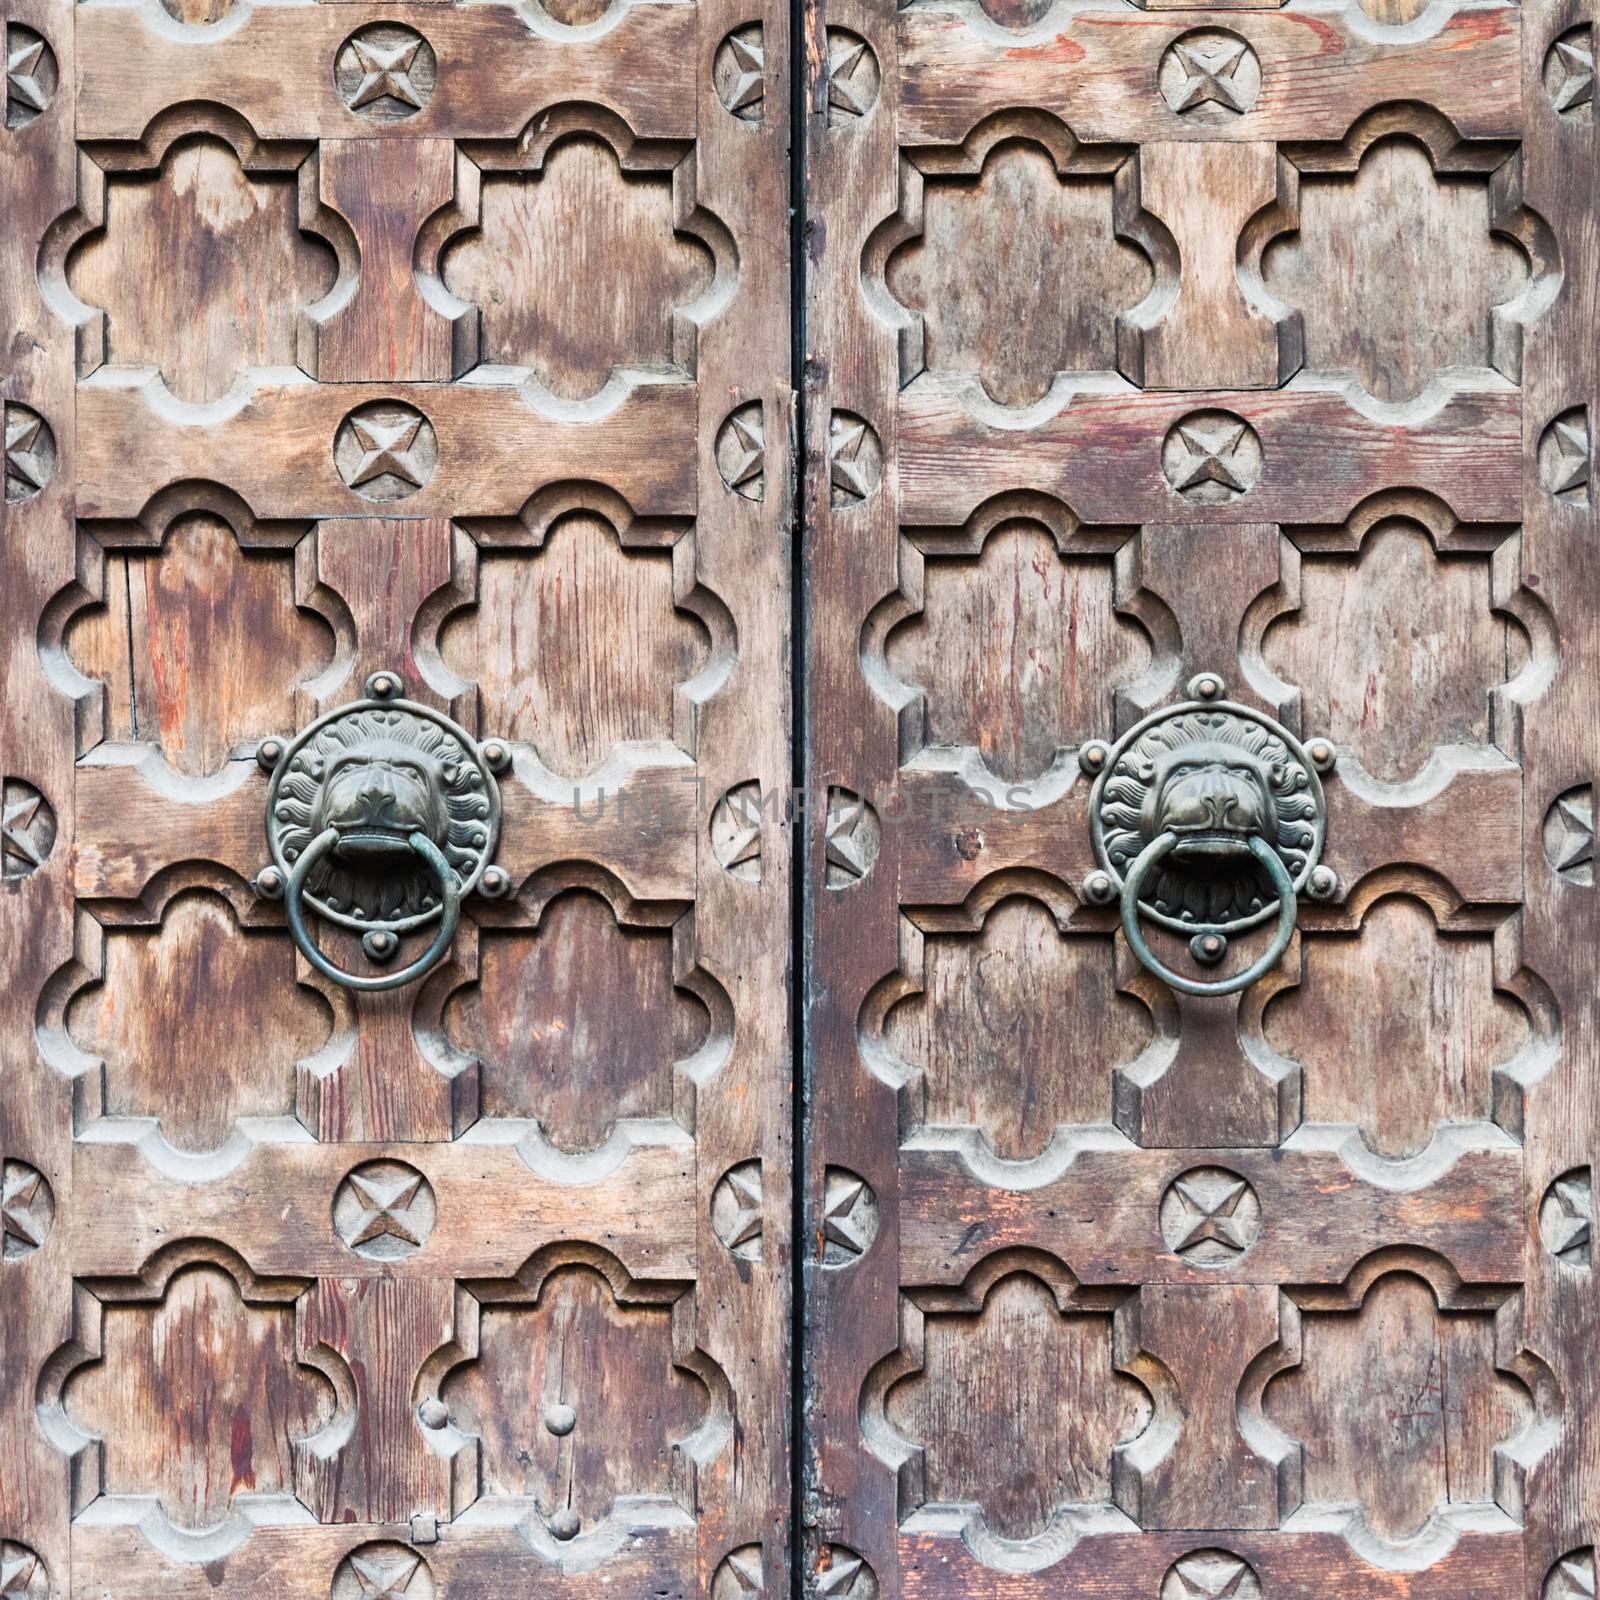 Detail of a wooden door with two knocker shaped a lion's head. by Isaac74